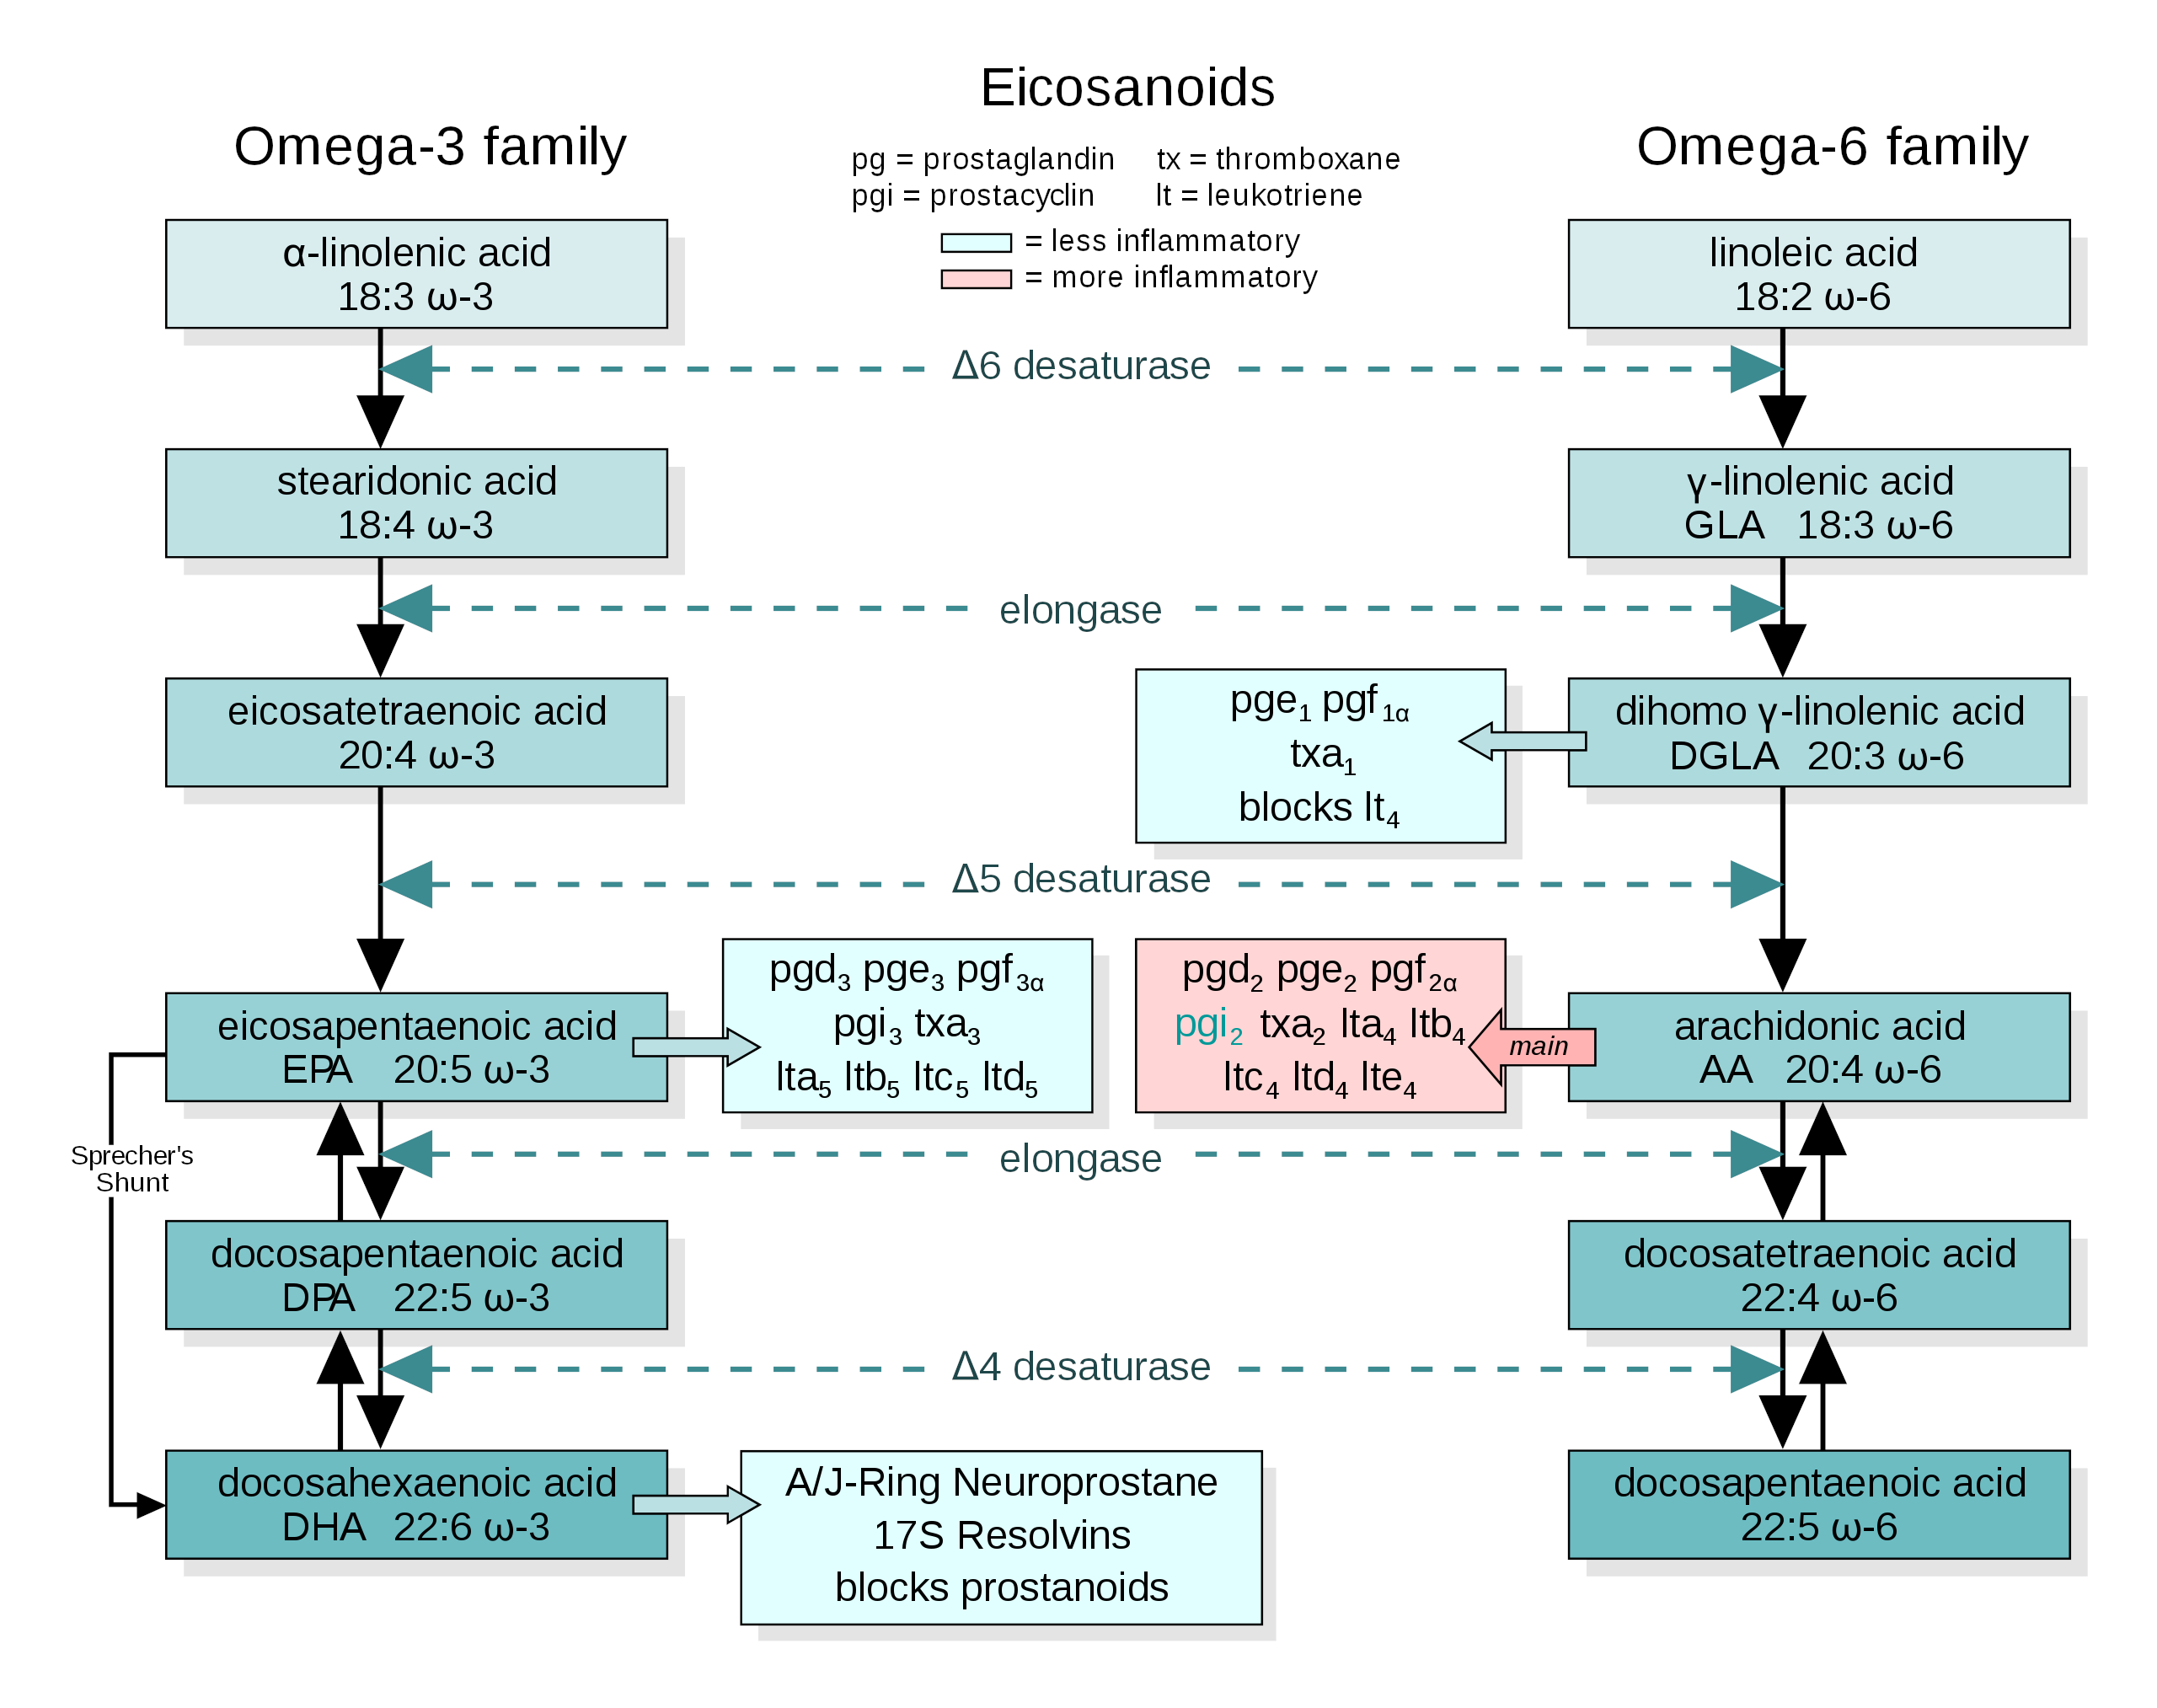 Omega-3 and Omega-6 Conversion Pathways